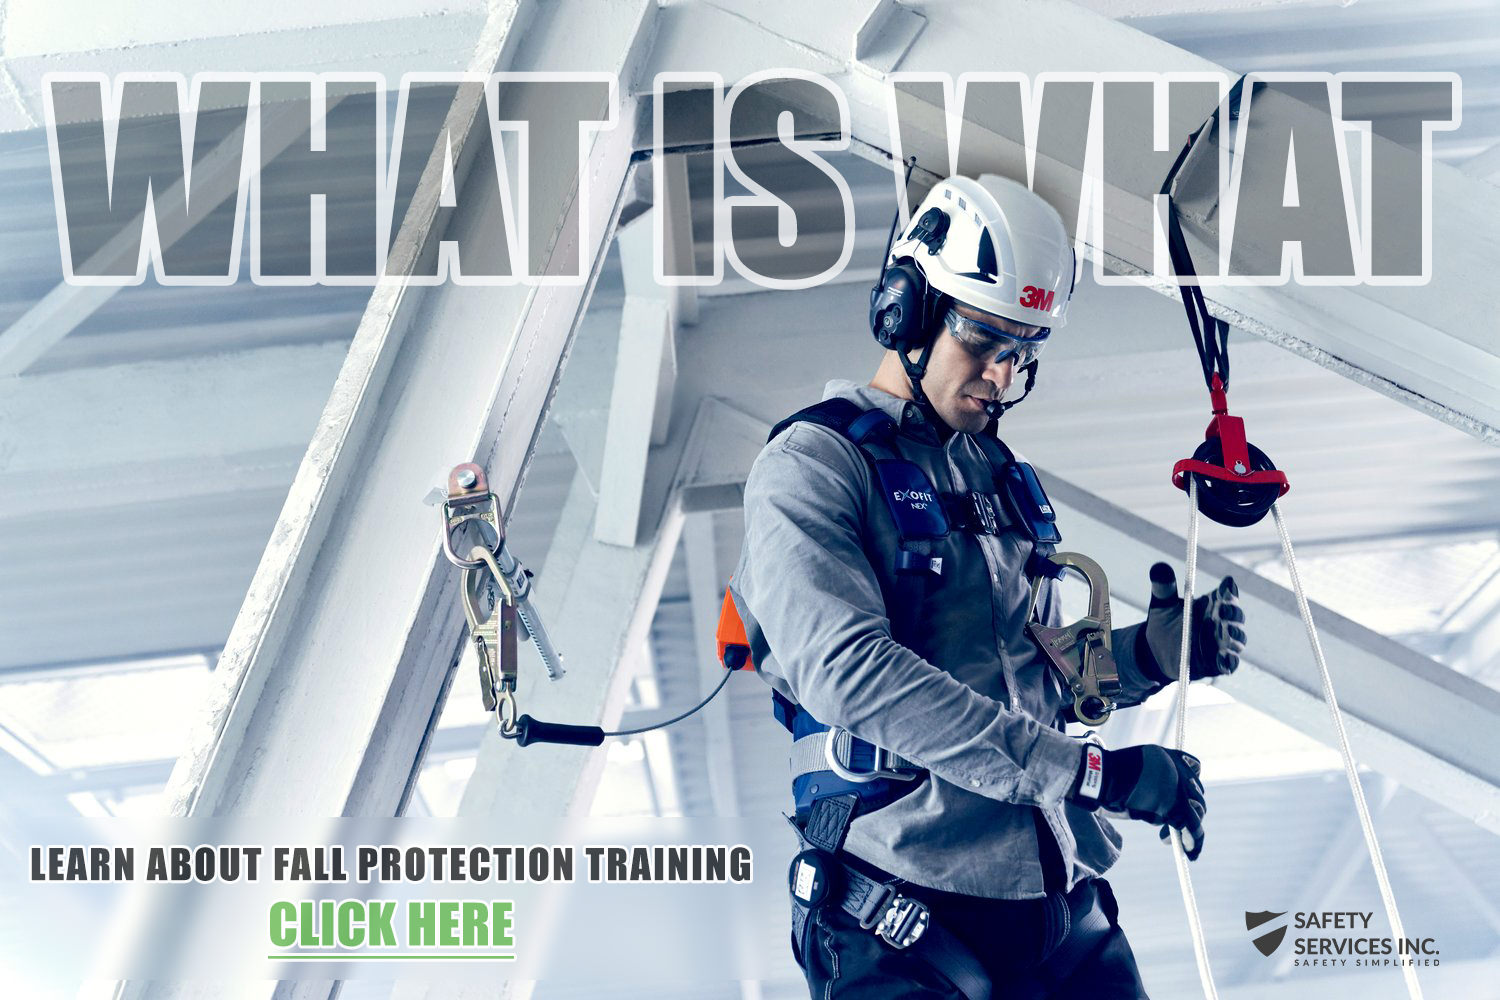 Fall Protection Training 101